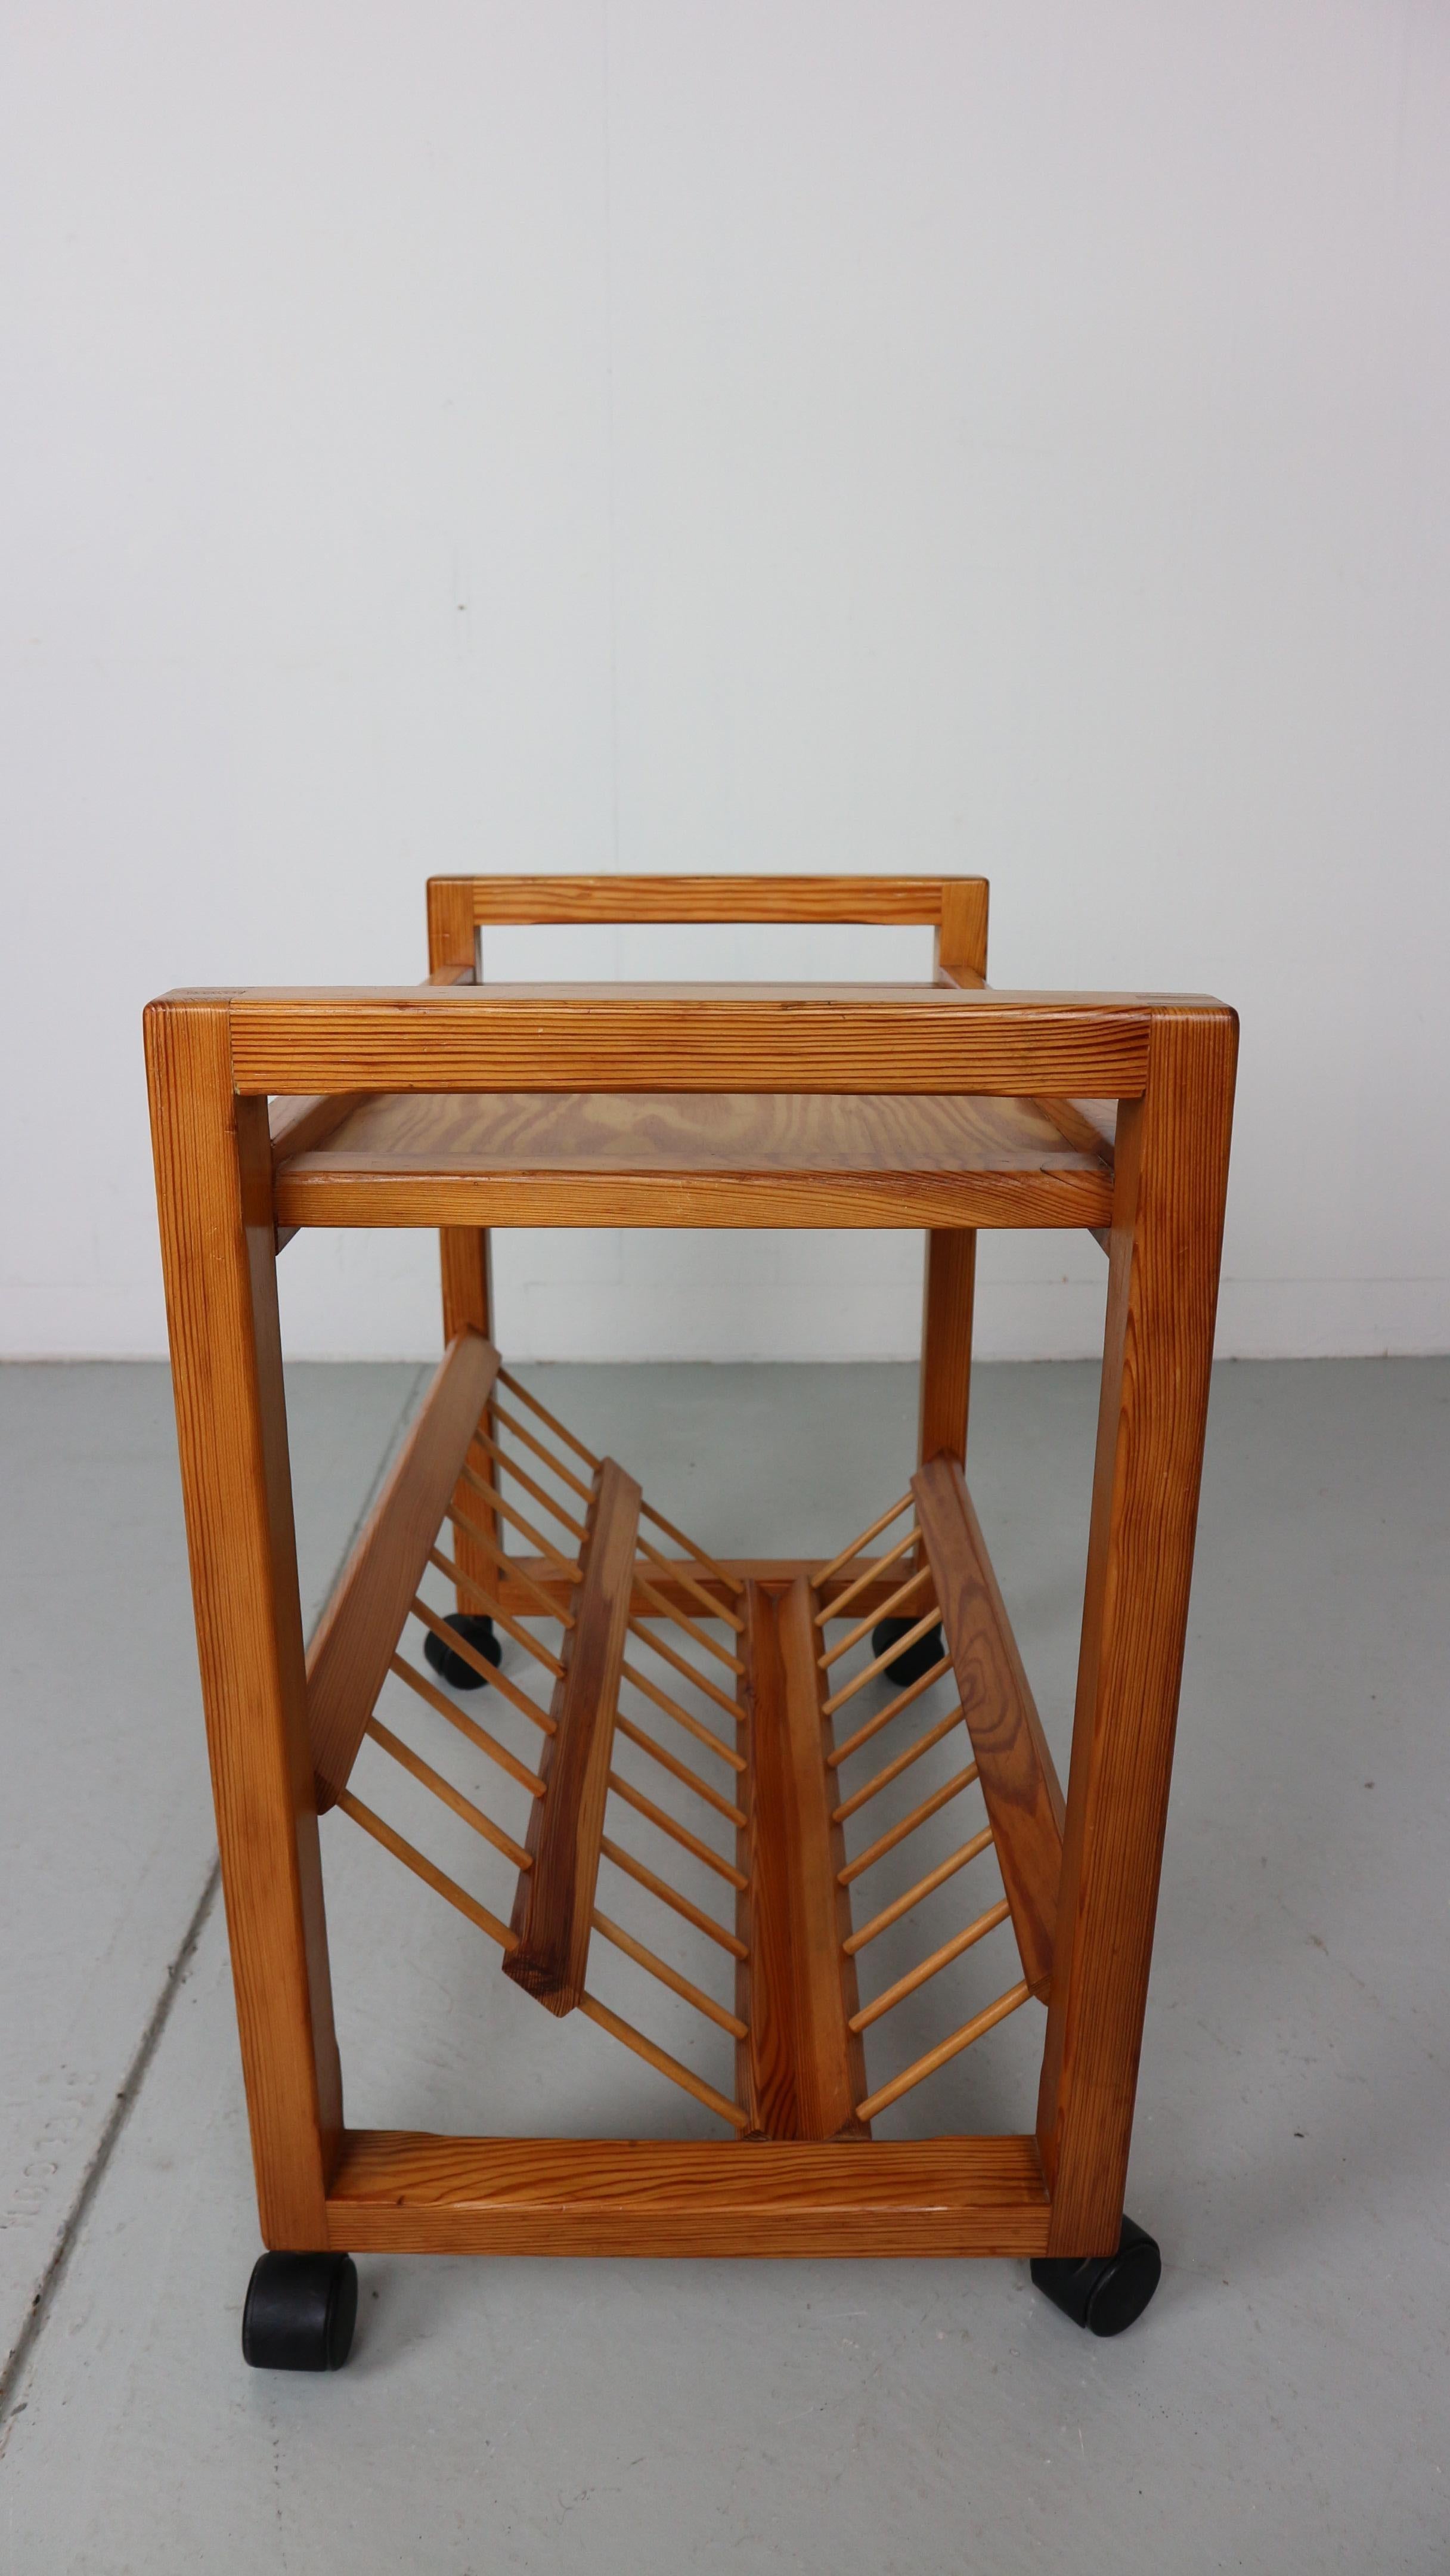 beautifully made pine magazine rack with wooden details on black plastic wheels. Can be used as bar card or serving / side table. 
Attributed to Ate van Apeldoorn, a Dutch designer who made lots of furniture mostly in pine.